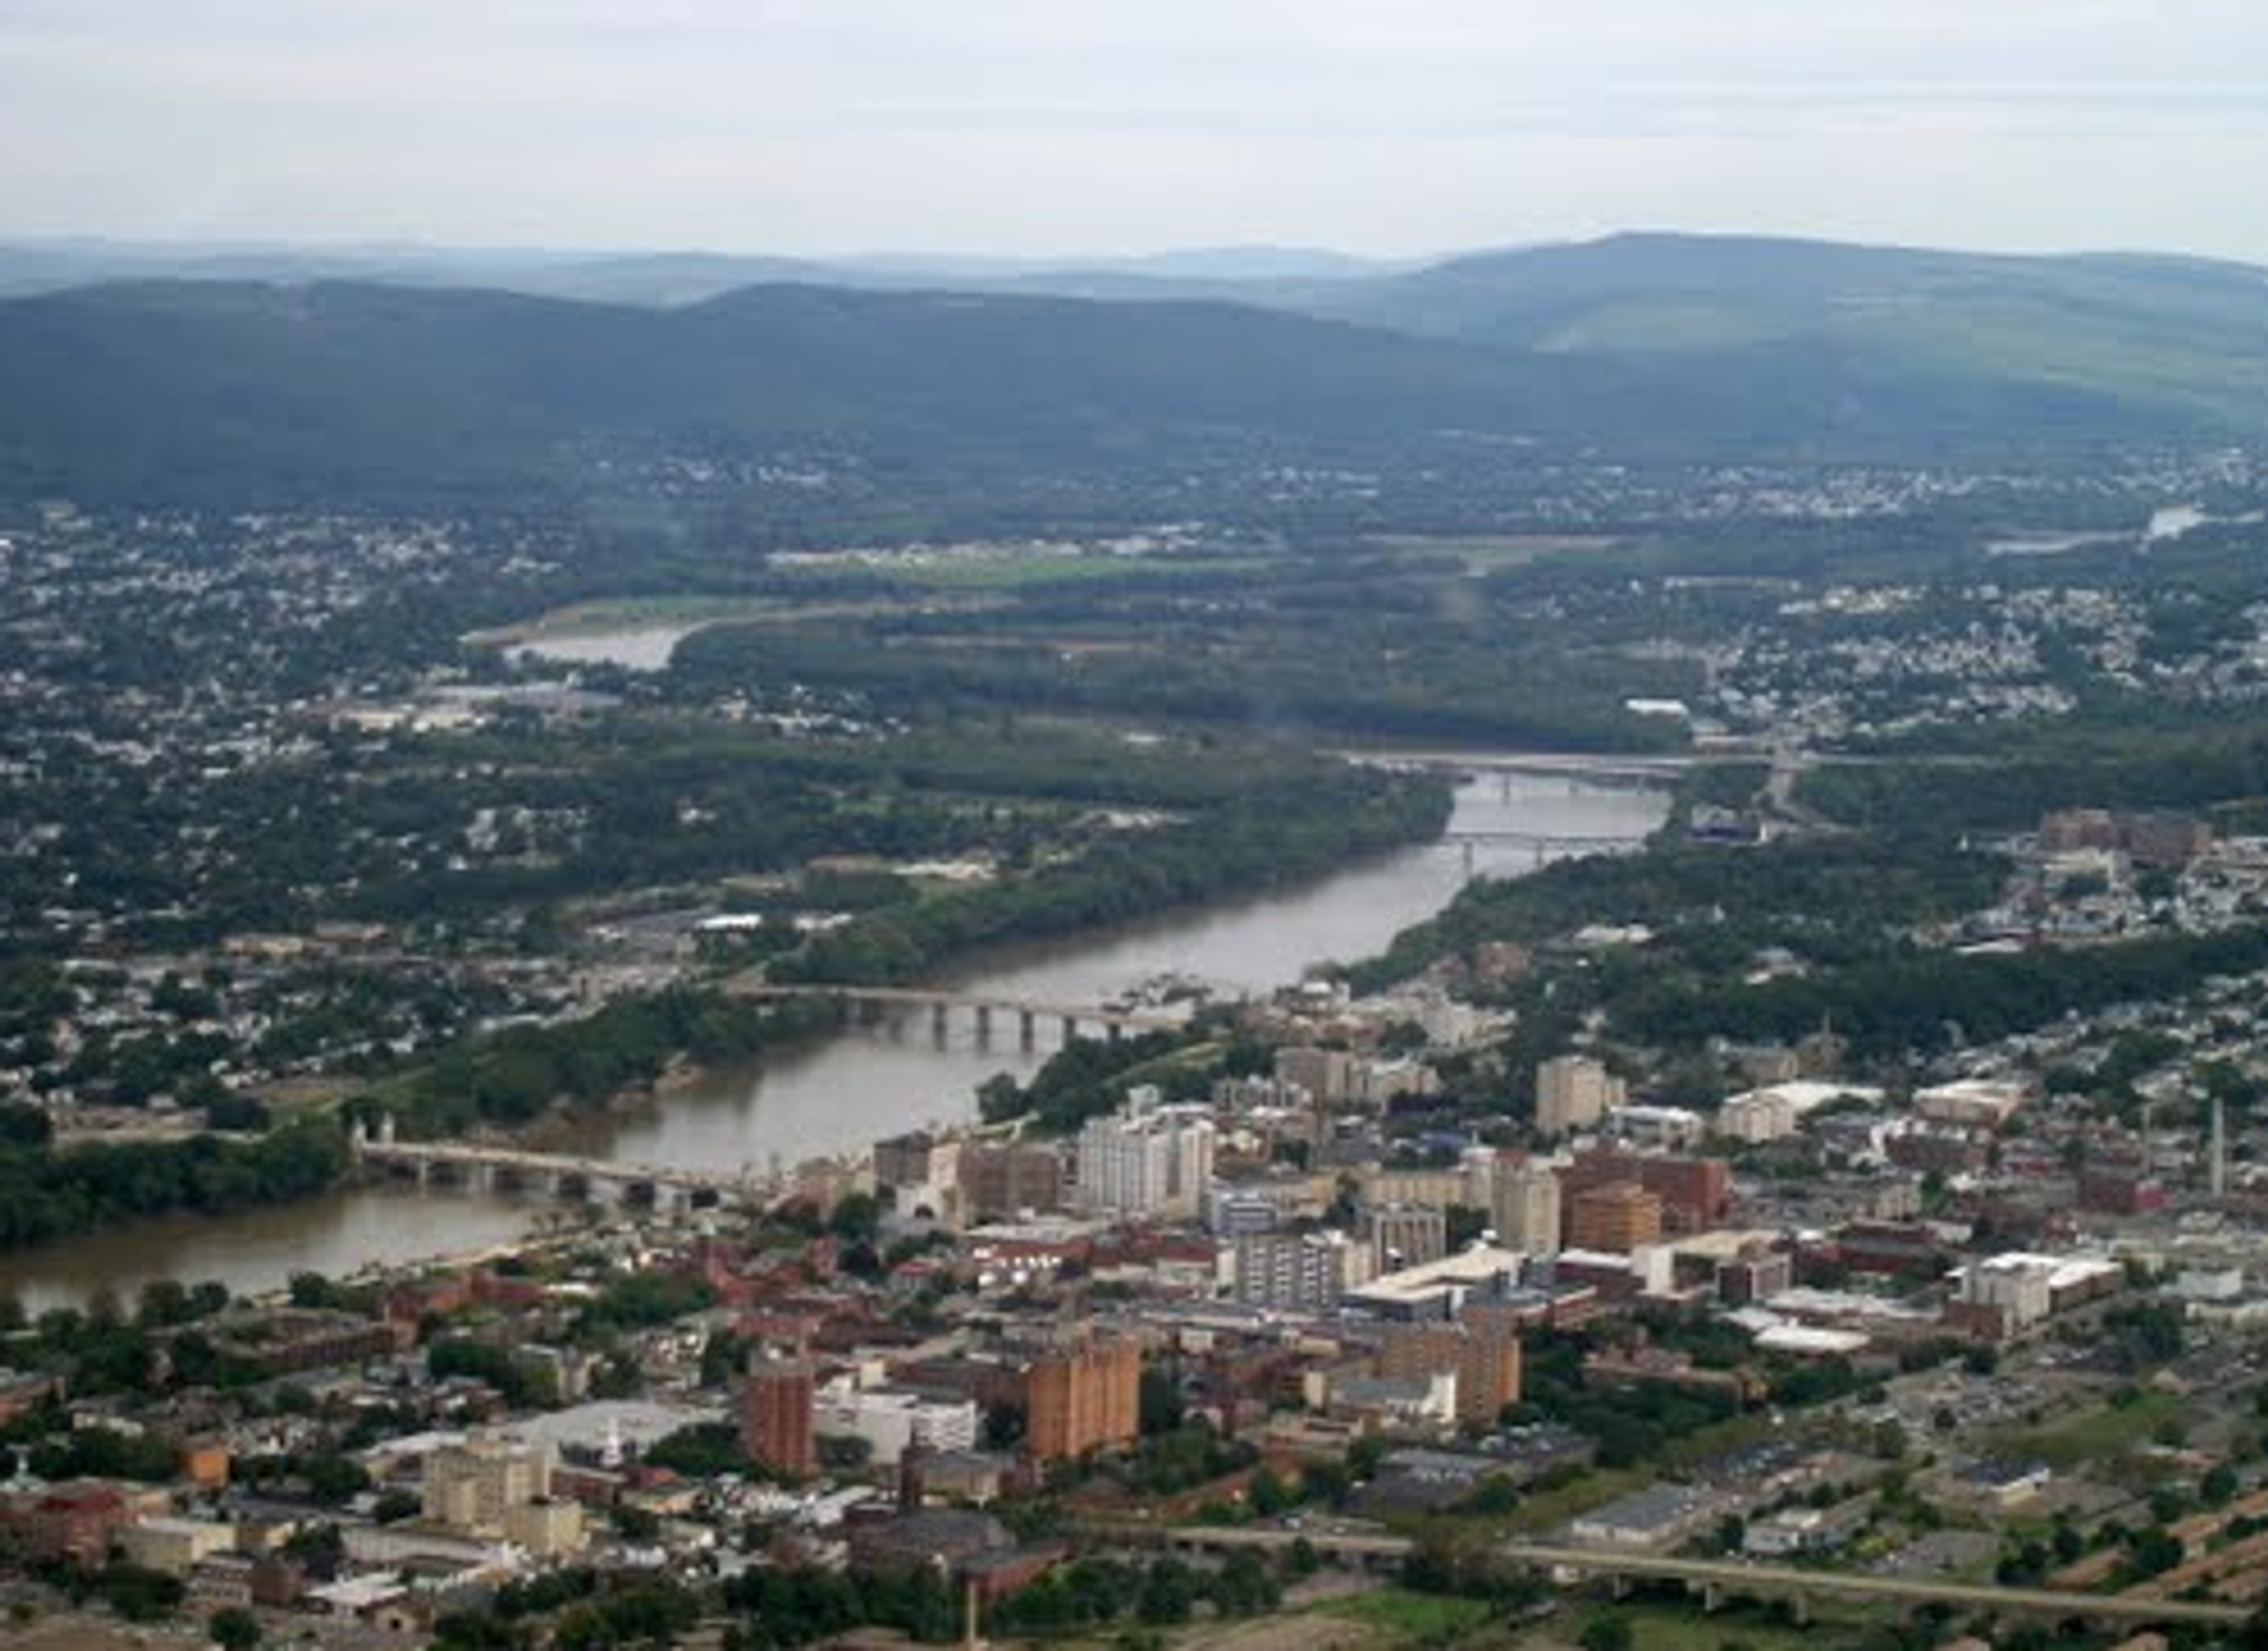 33 Signs You're From "The (Wyoming) Valley"